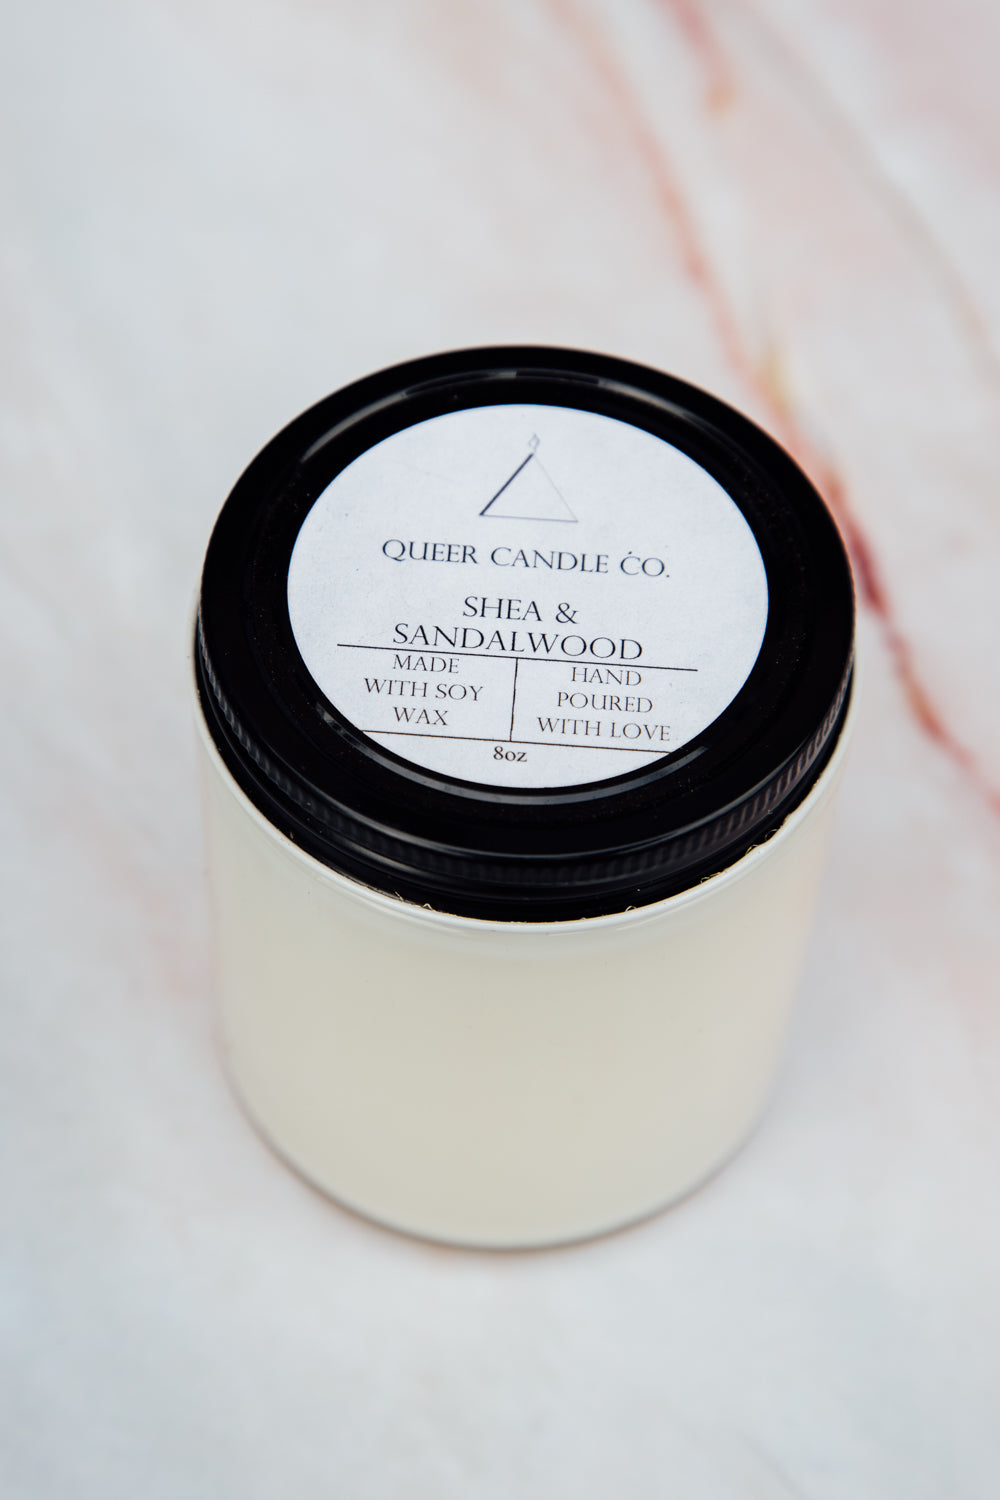 Queer Candle - Shea & Sandalwood